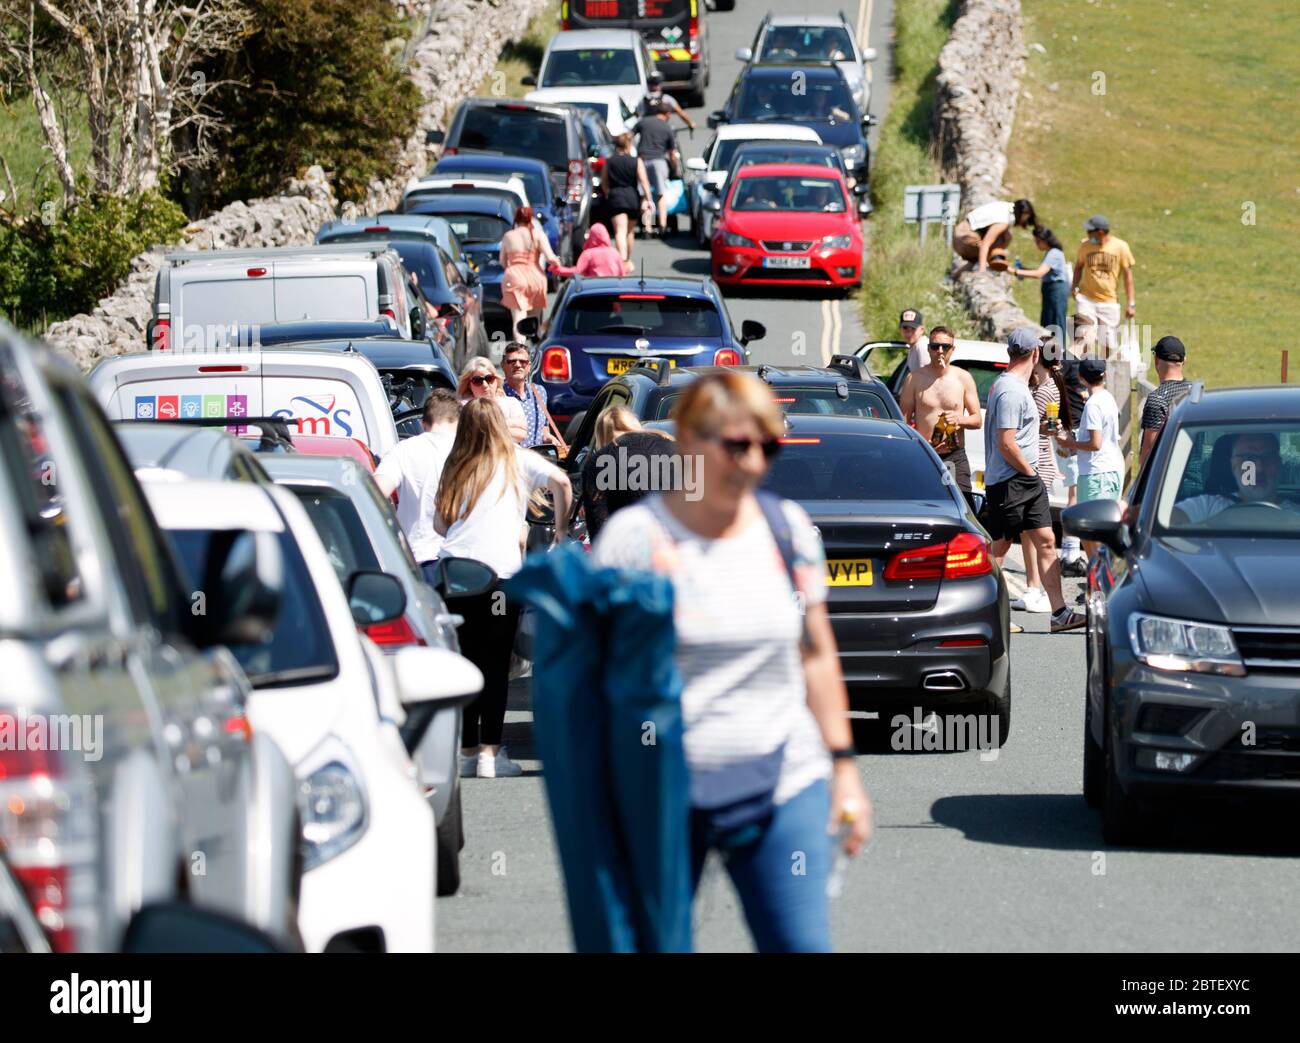 Gridlock stretches on a road in Burnsall in the Yorkshire Dales, as people flock to parks and beaches with lockdown measures eased. Stock Photo